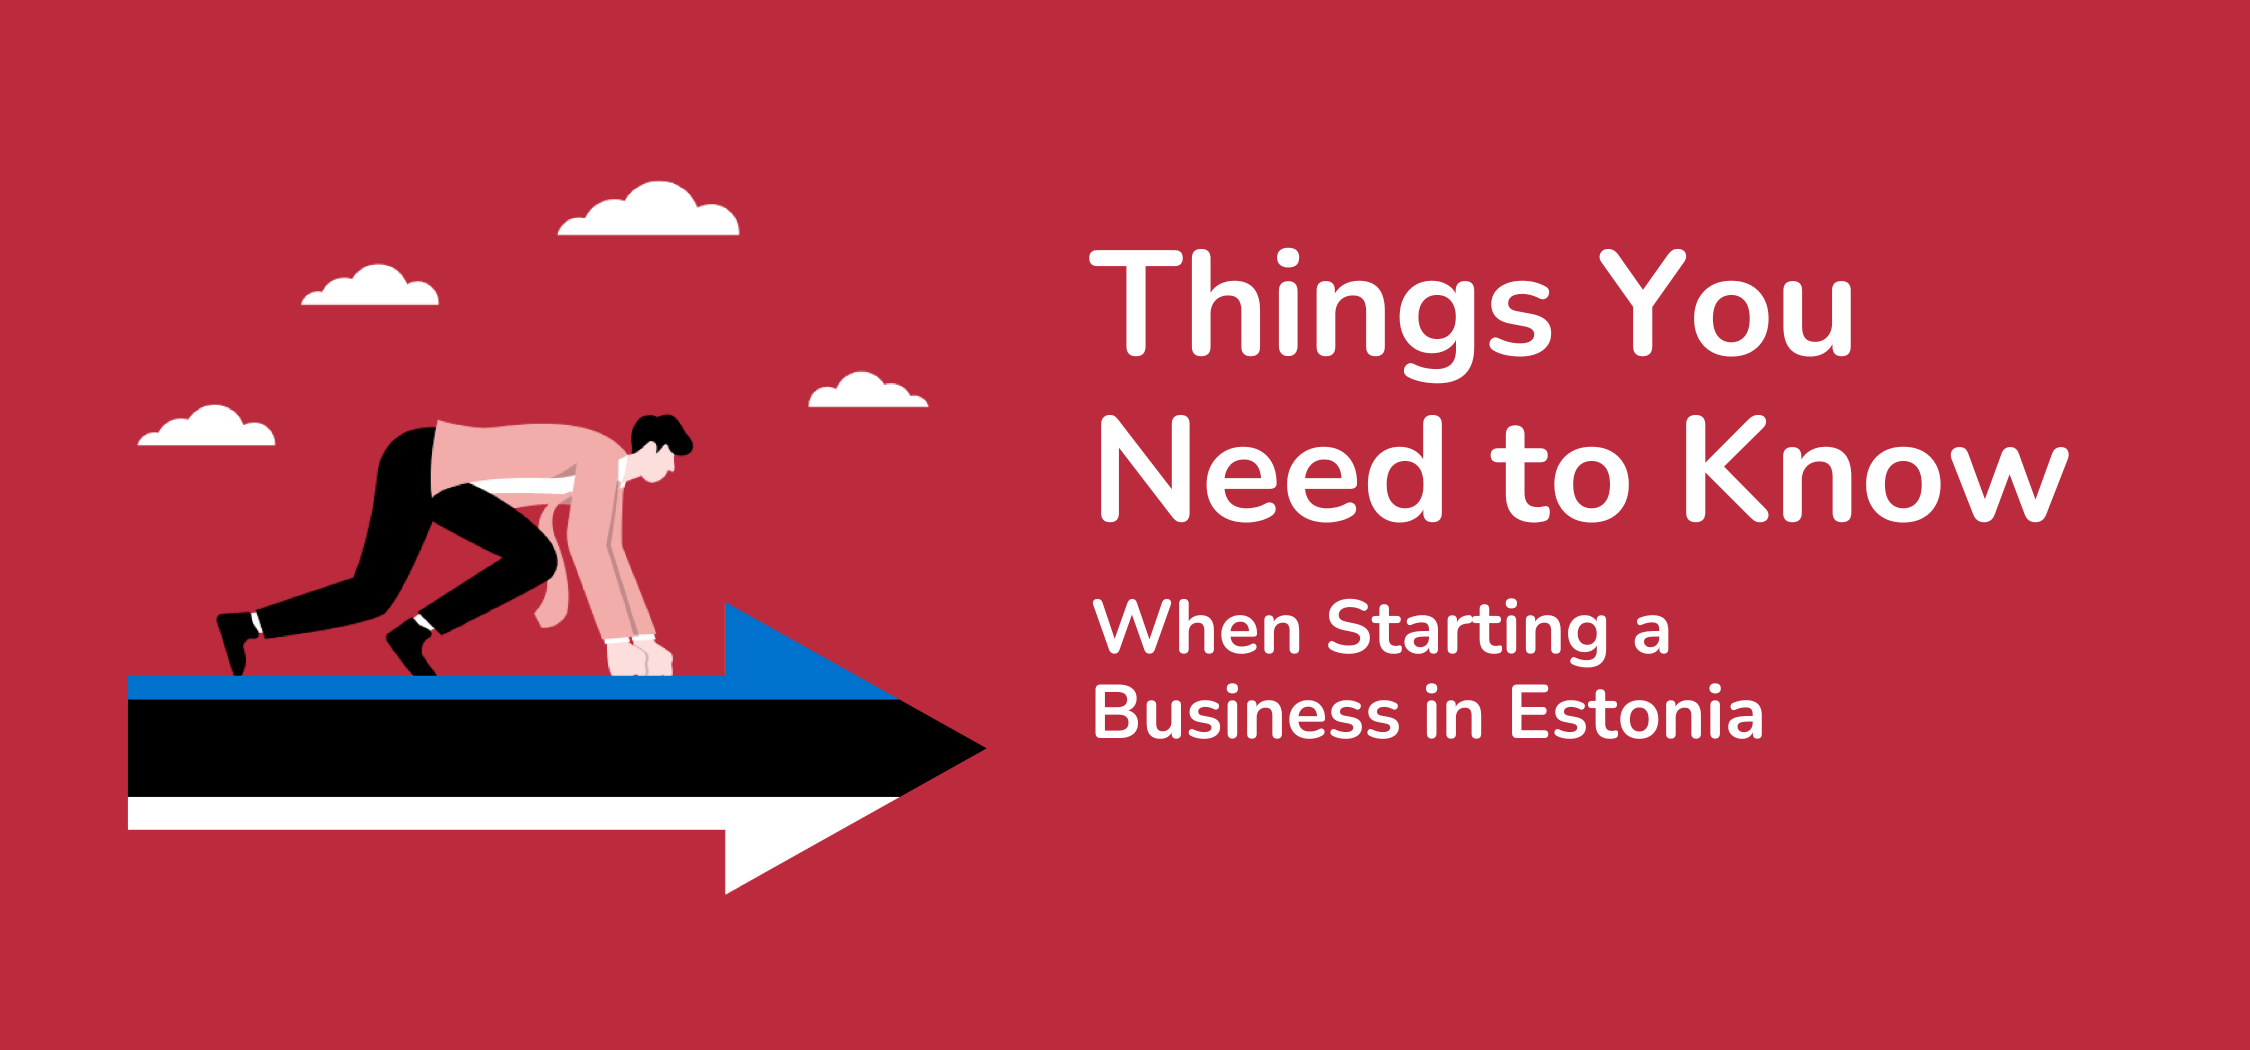 Things You Need to Know When Starting a Business in Estonia